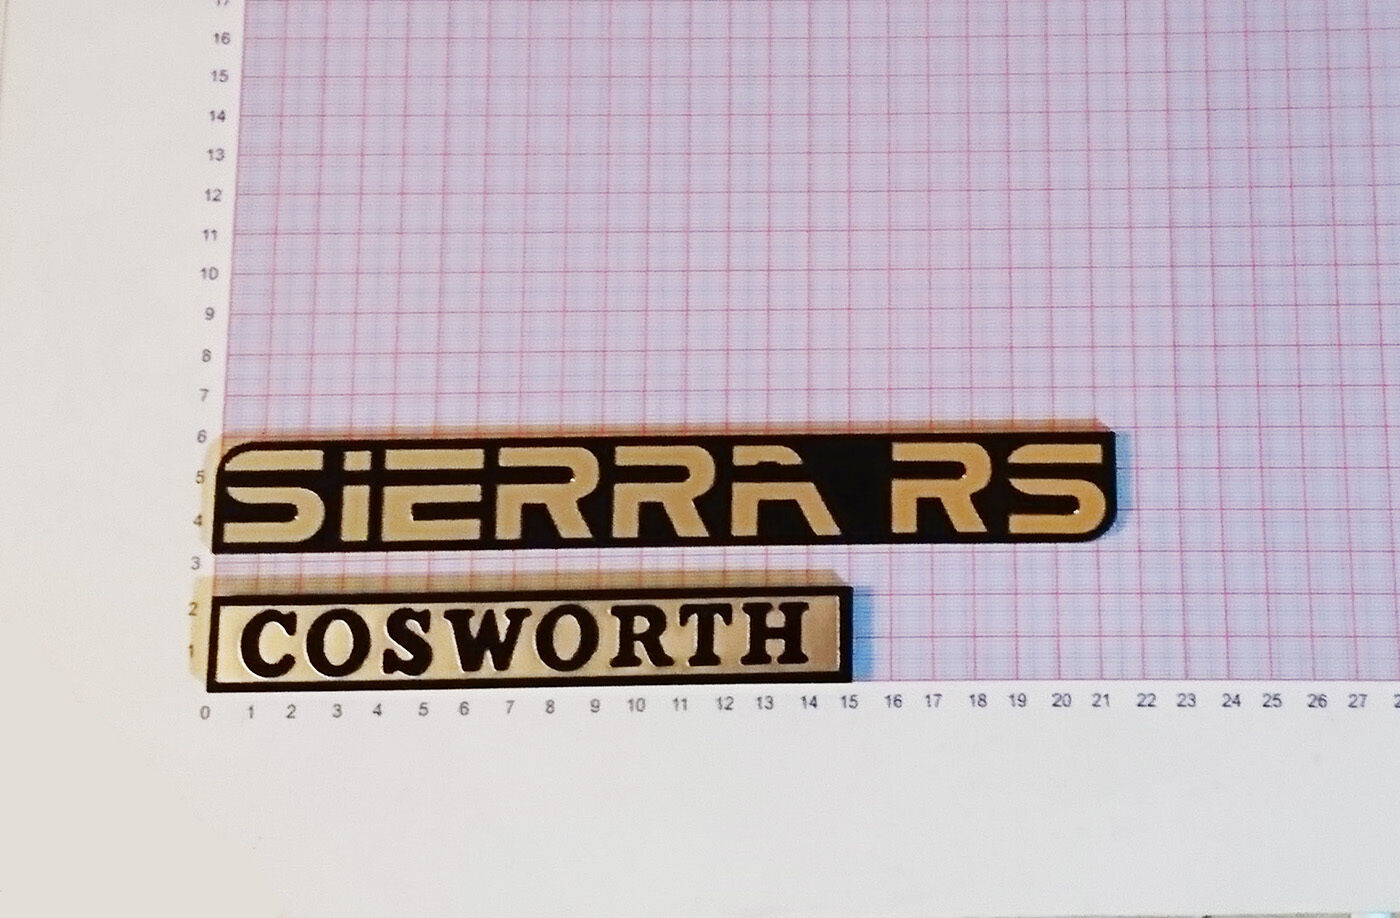 Ford Sierra RS Cosworth BOOT REAR BADGE EMBLEMS 2WD 4X4 